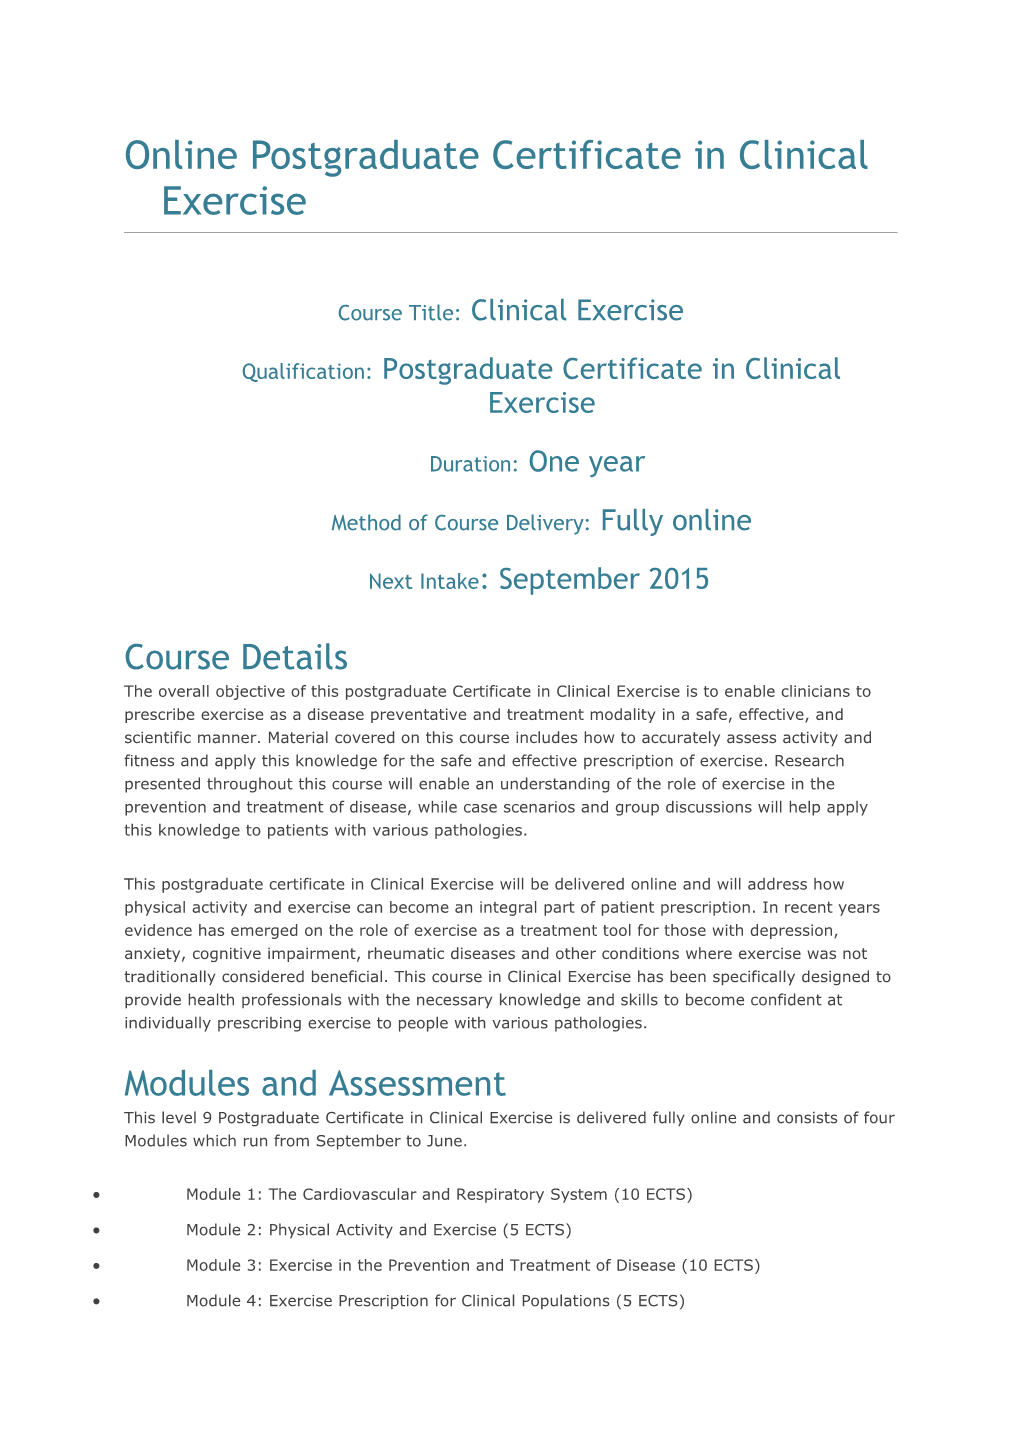 Online Postgraduate Certificate in Clinical Exercise